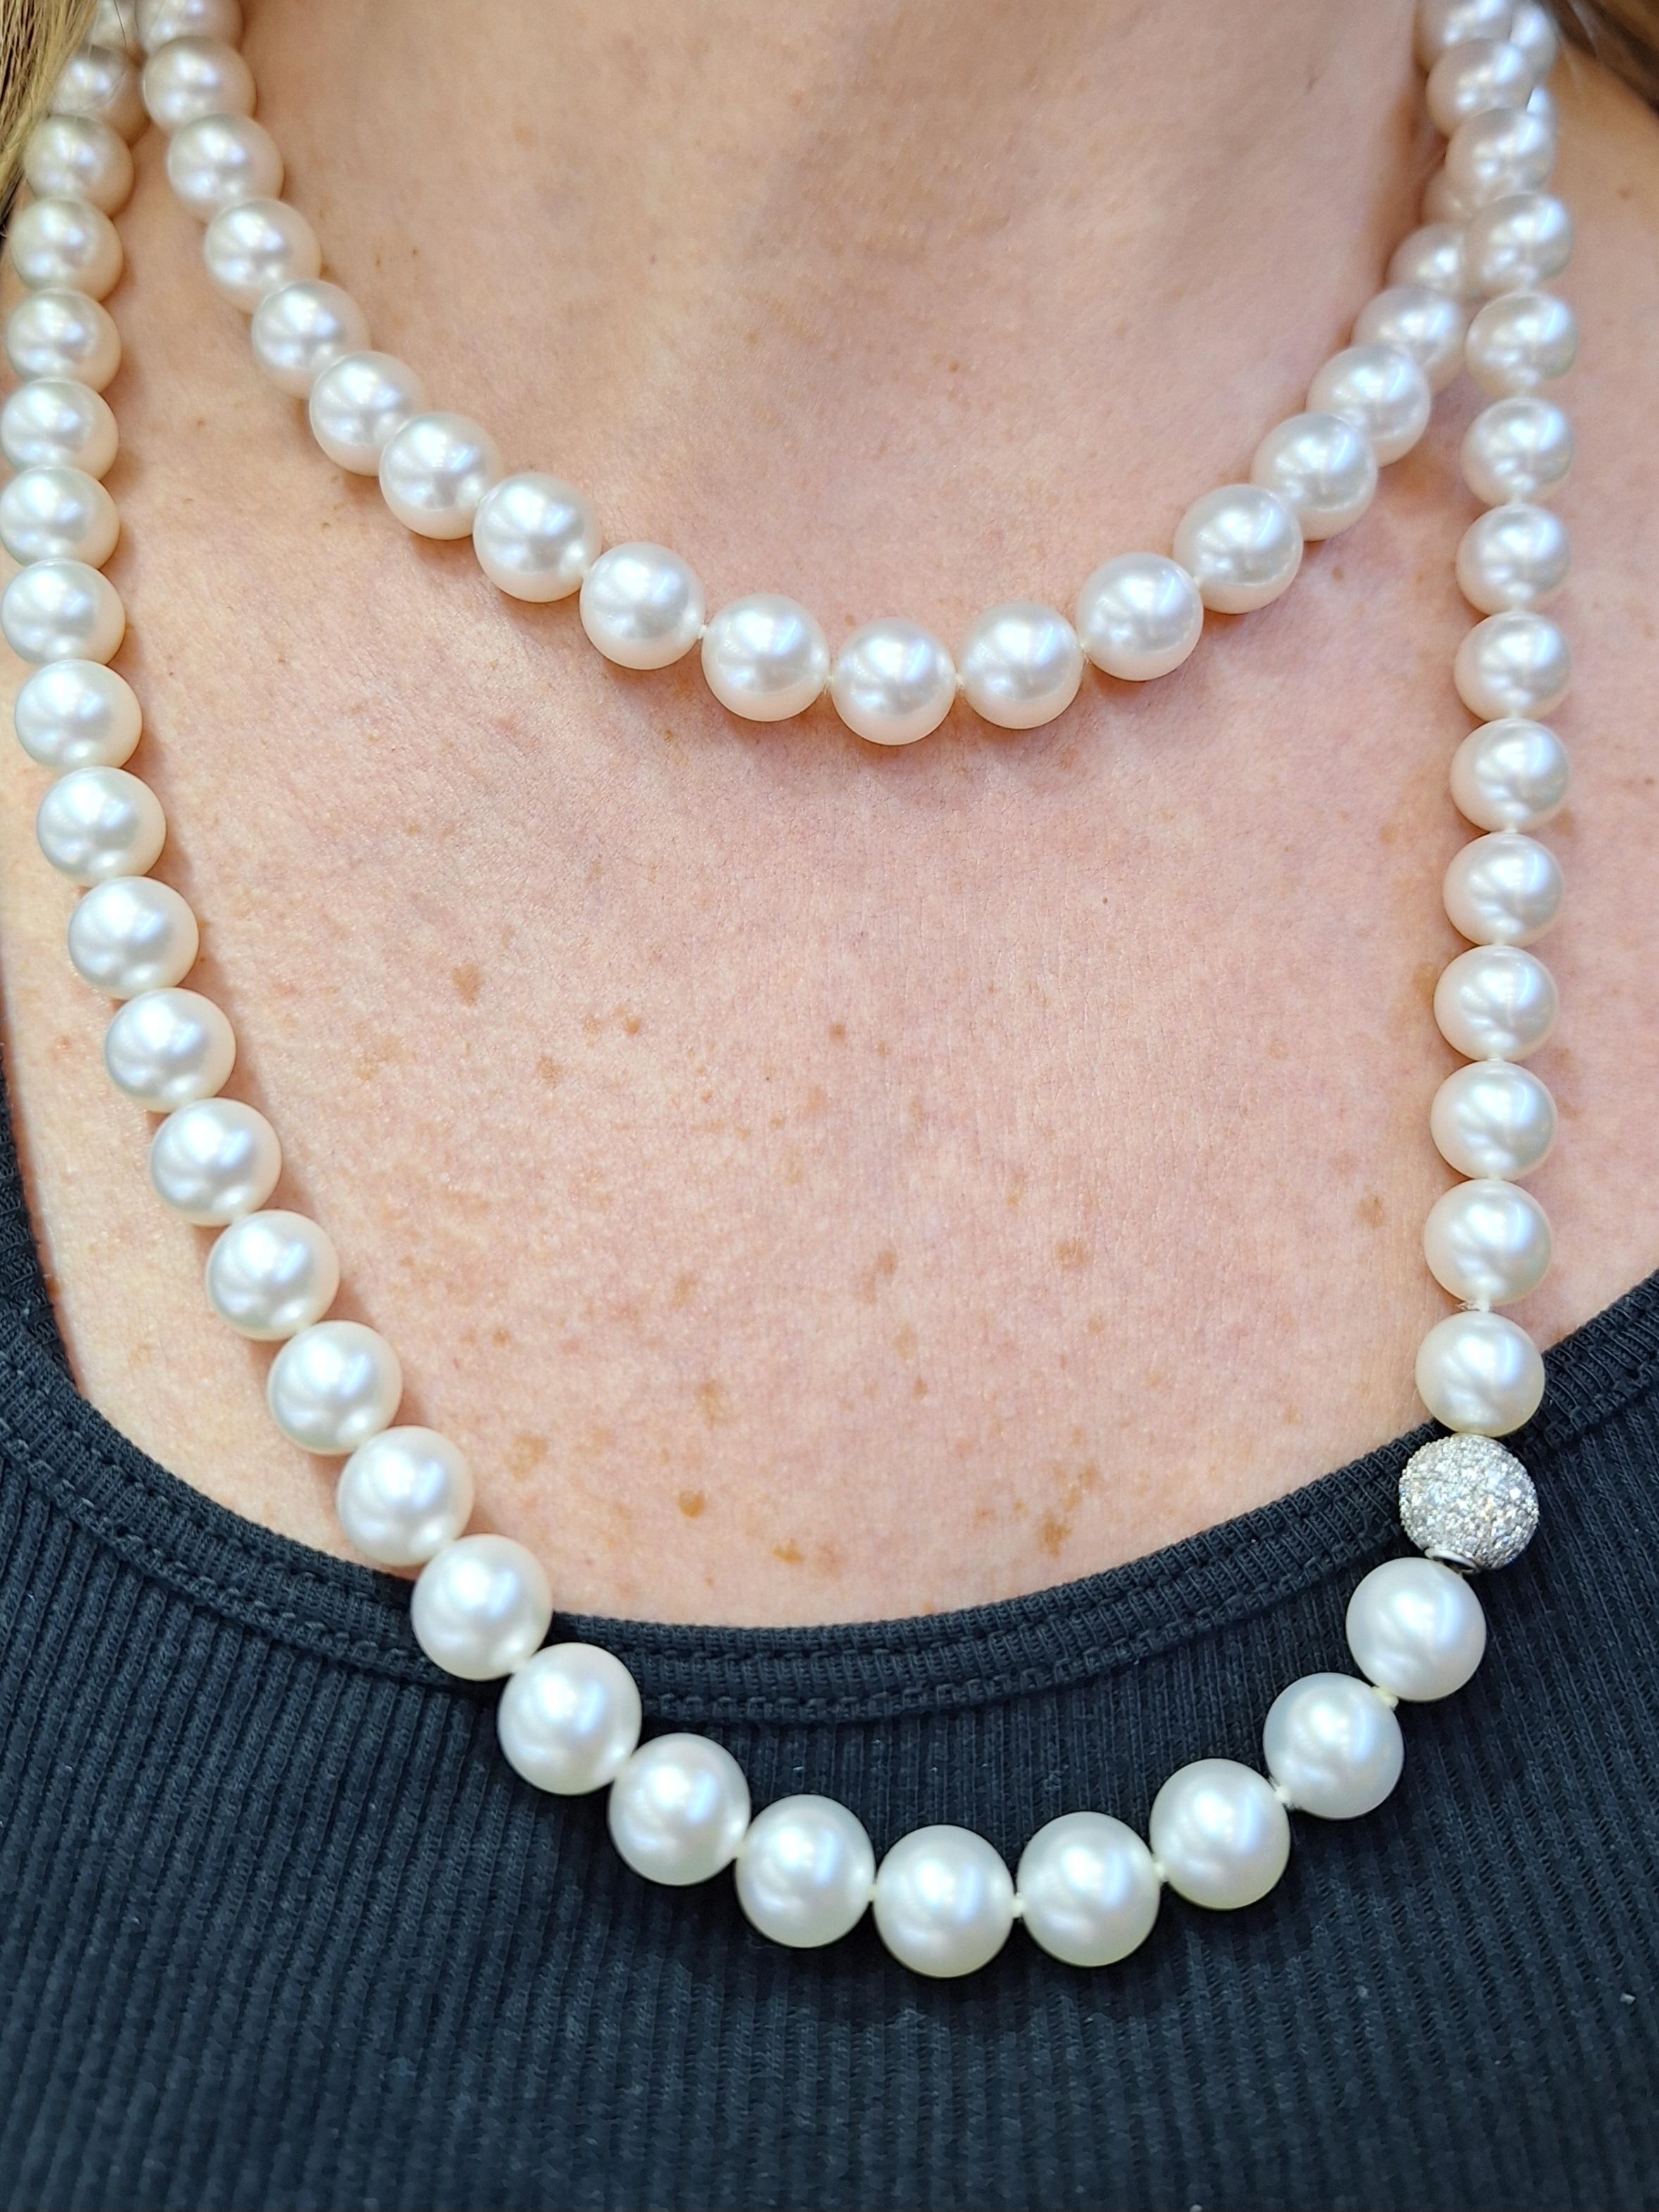 Graff Pearl Long Necklace with diamond clasp In Excellent Condition For Sale In New York, NY